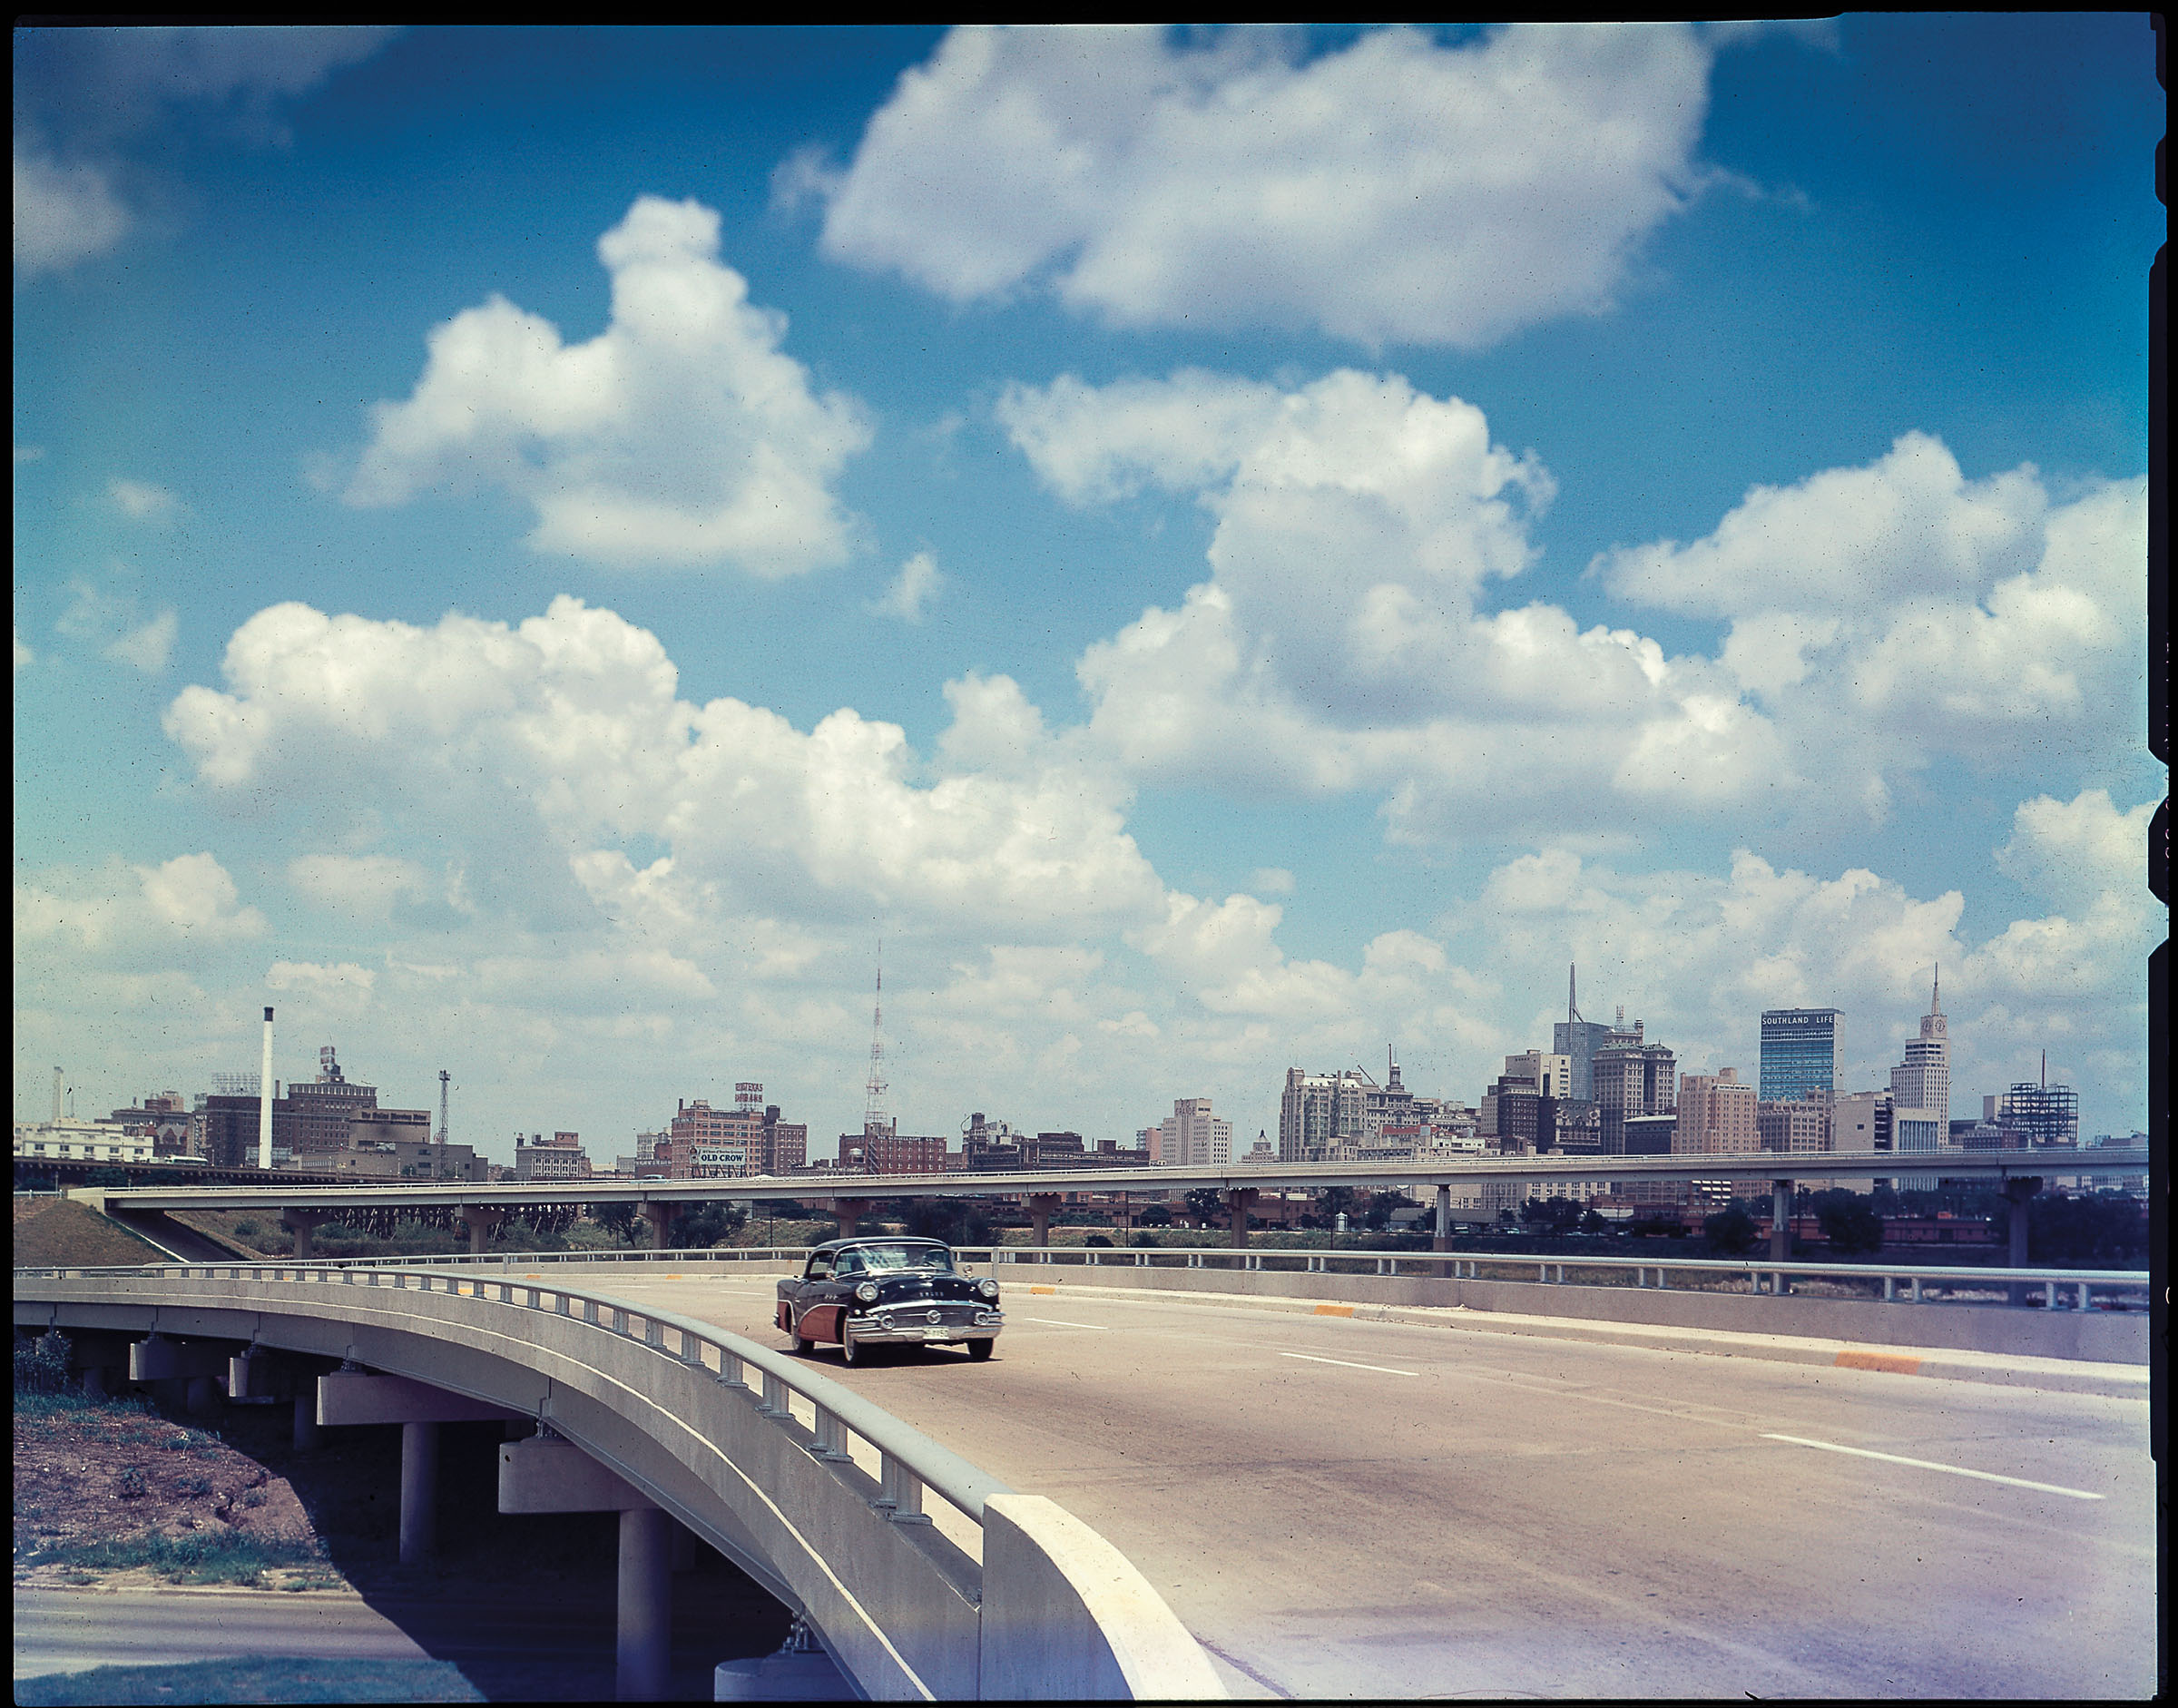 A vintage photo of a car driving on a bridge with the Dallas skyline in the background